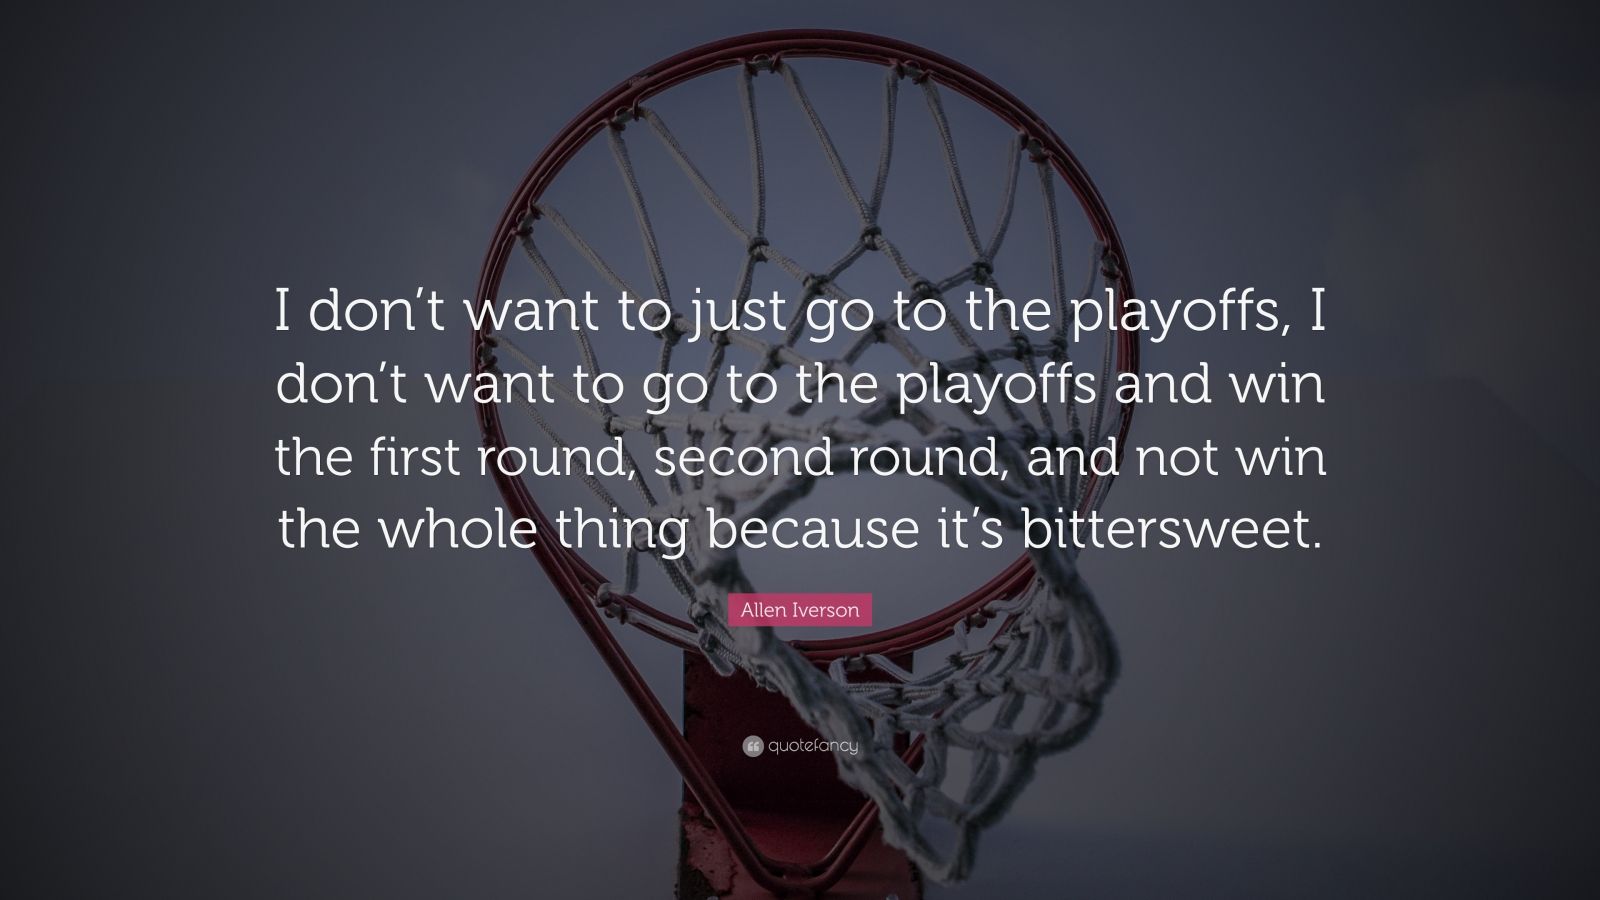 Allen Iverson Quote: “I don’t want to just go to the playoffs, I don’t ...